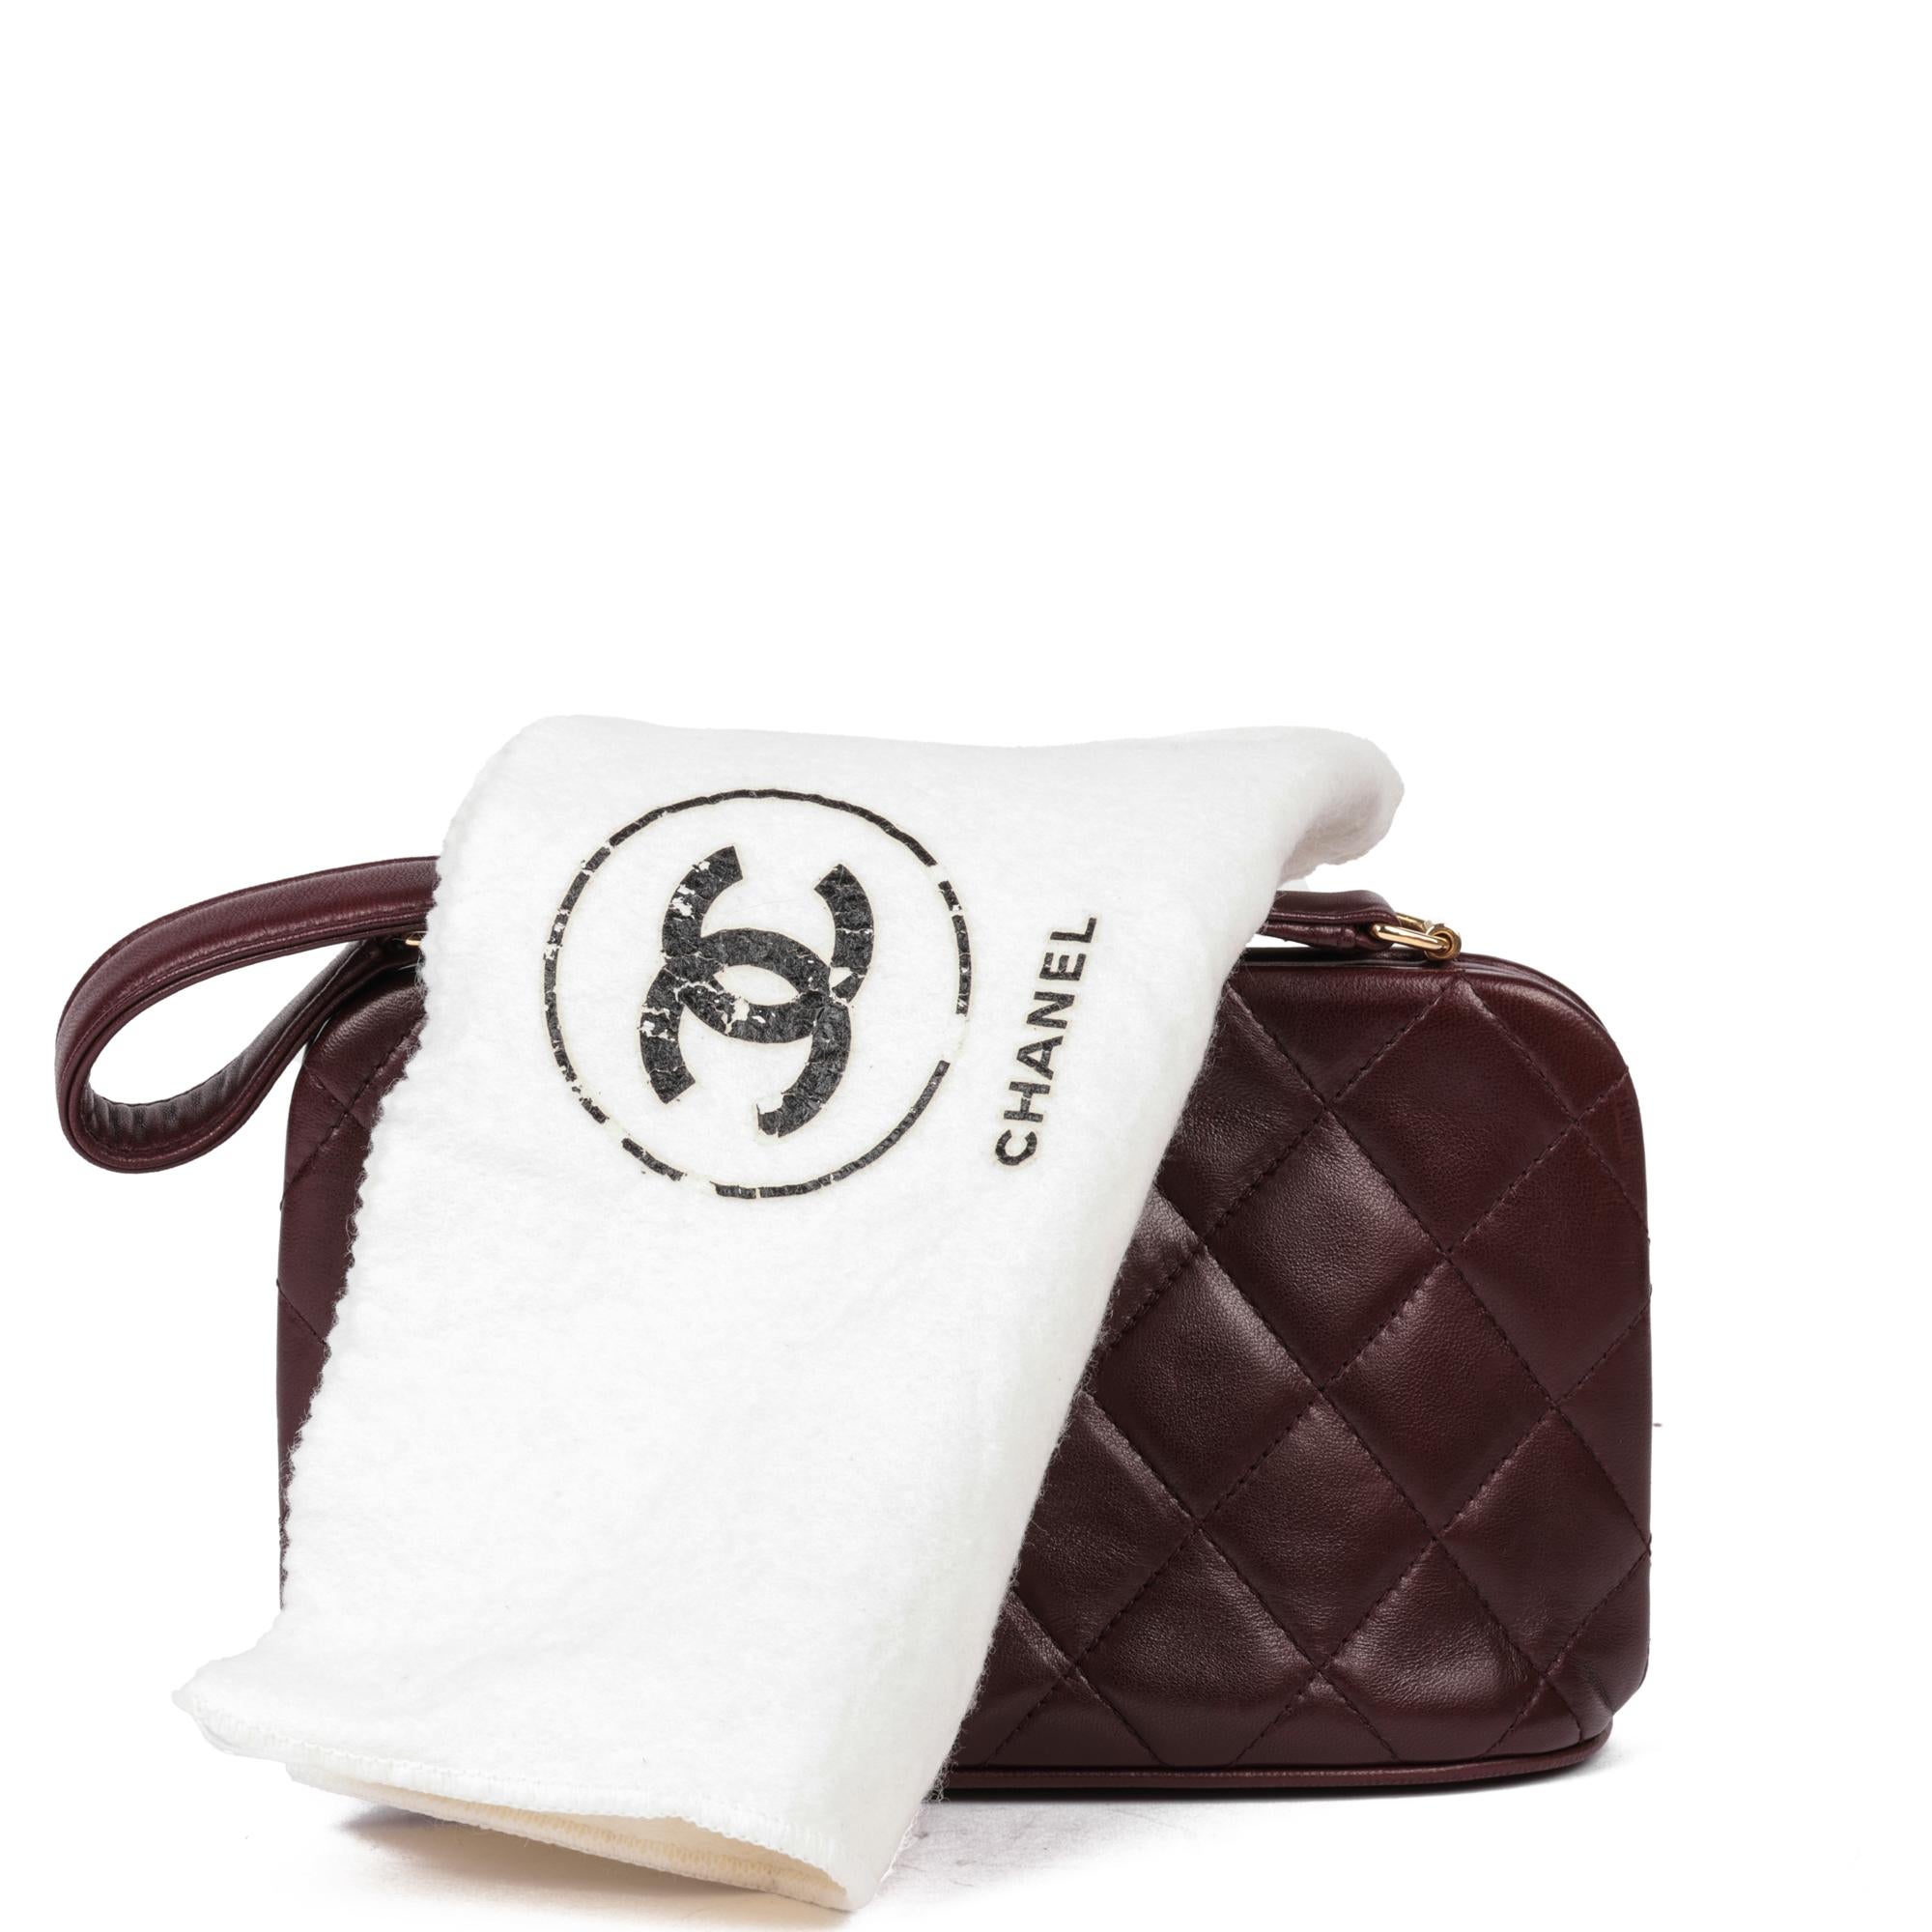 CHANEL Burgundy Quilted Lambskin Timeless Top Handle Frame Bag 4